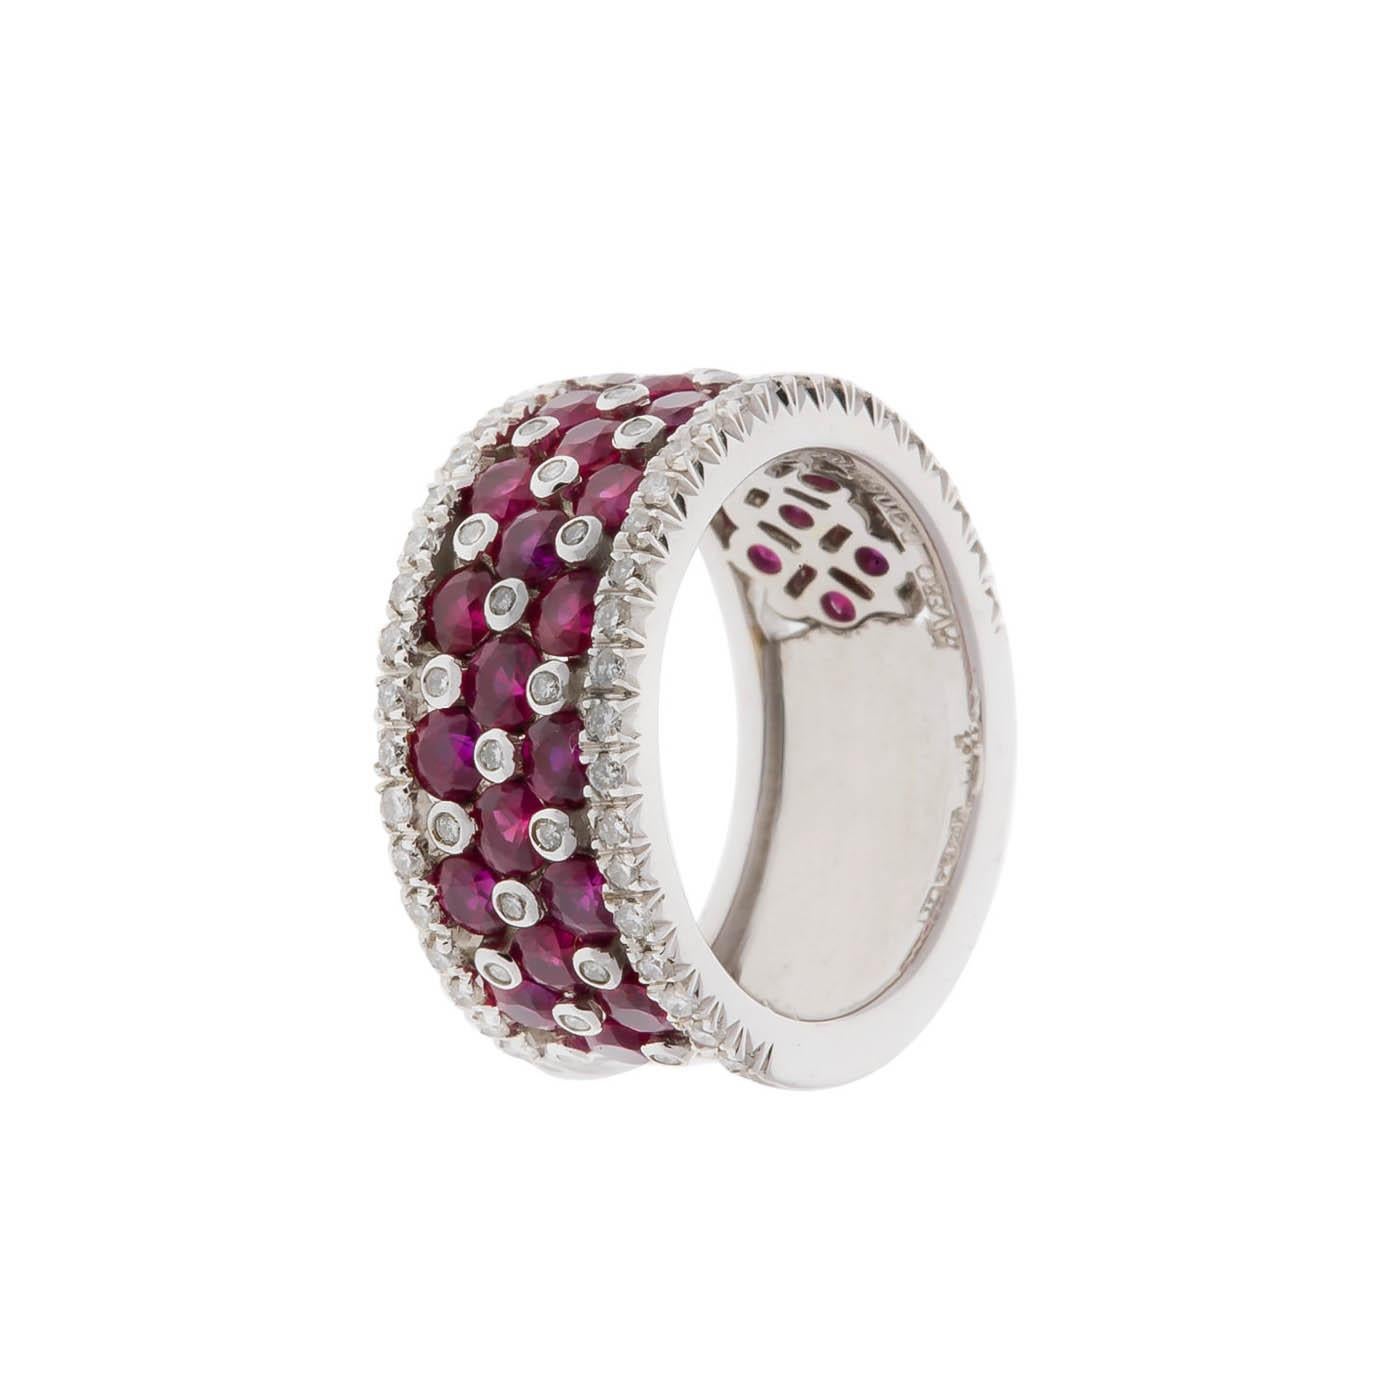 Favero 18K white gold ruby and diamond band containing 3.24 carats of round rubies and 0.48 carat of round diamond.
Size 6 1/2. This ring can be sized.